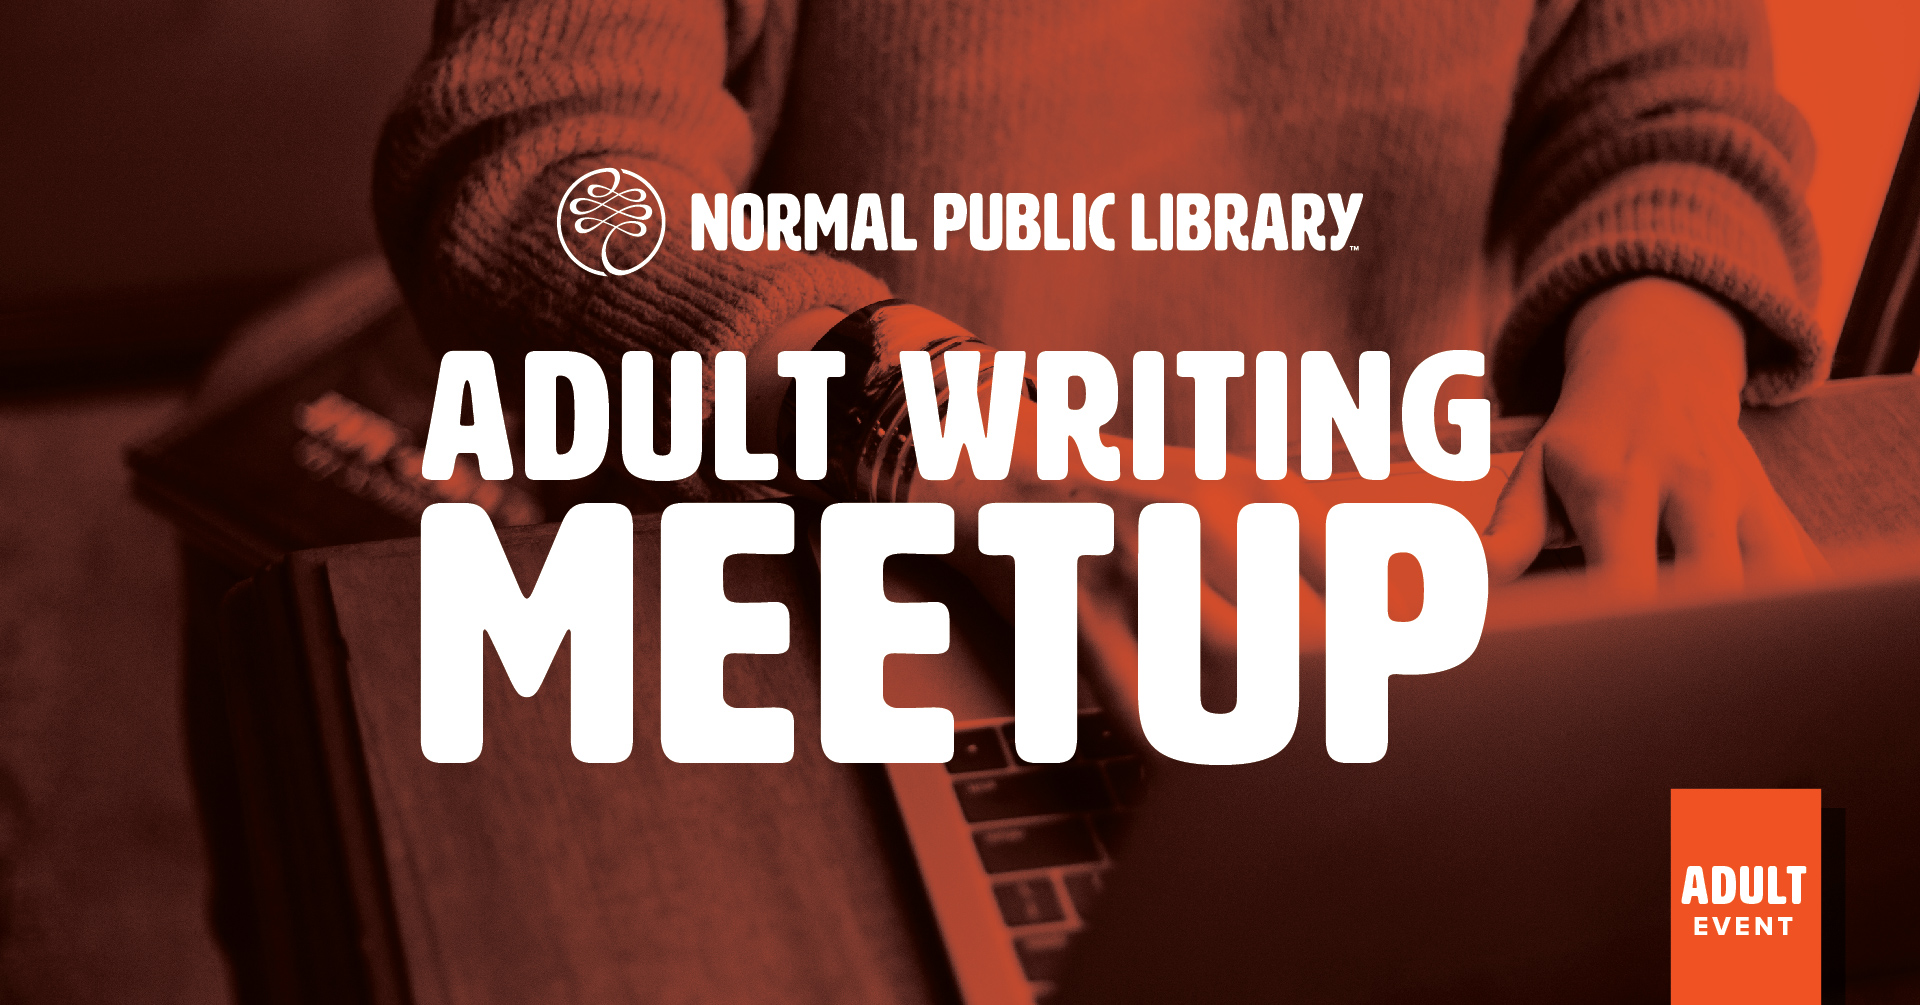 Image for Adult Writing Meetup.